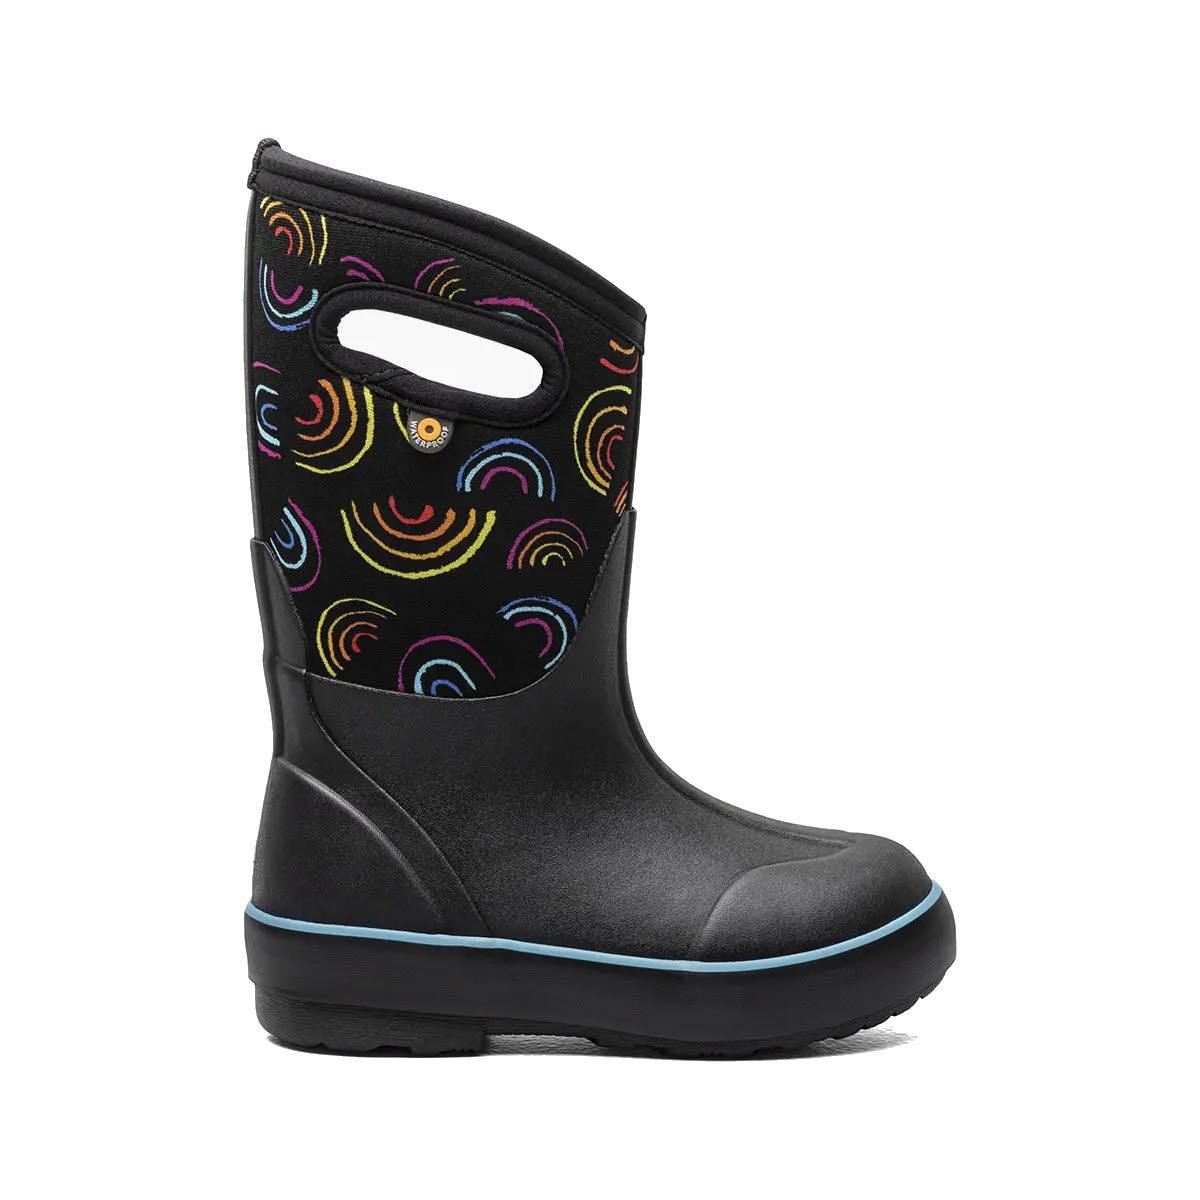 Children’s Bogs Classic II Wild Rainbows black rubber boot with a colorful swirl pattern on the upper section, featuring better traction and a blue trim around the sole.